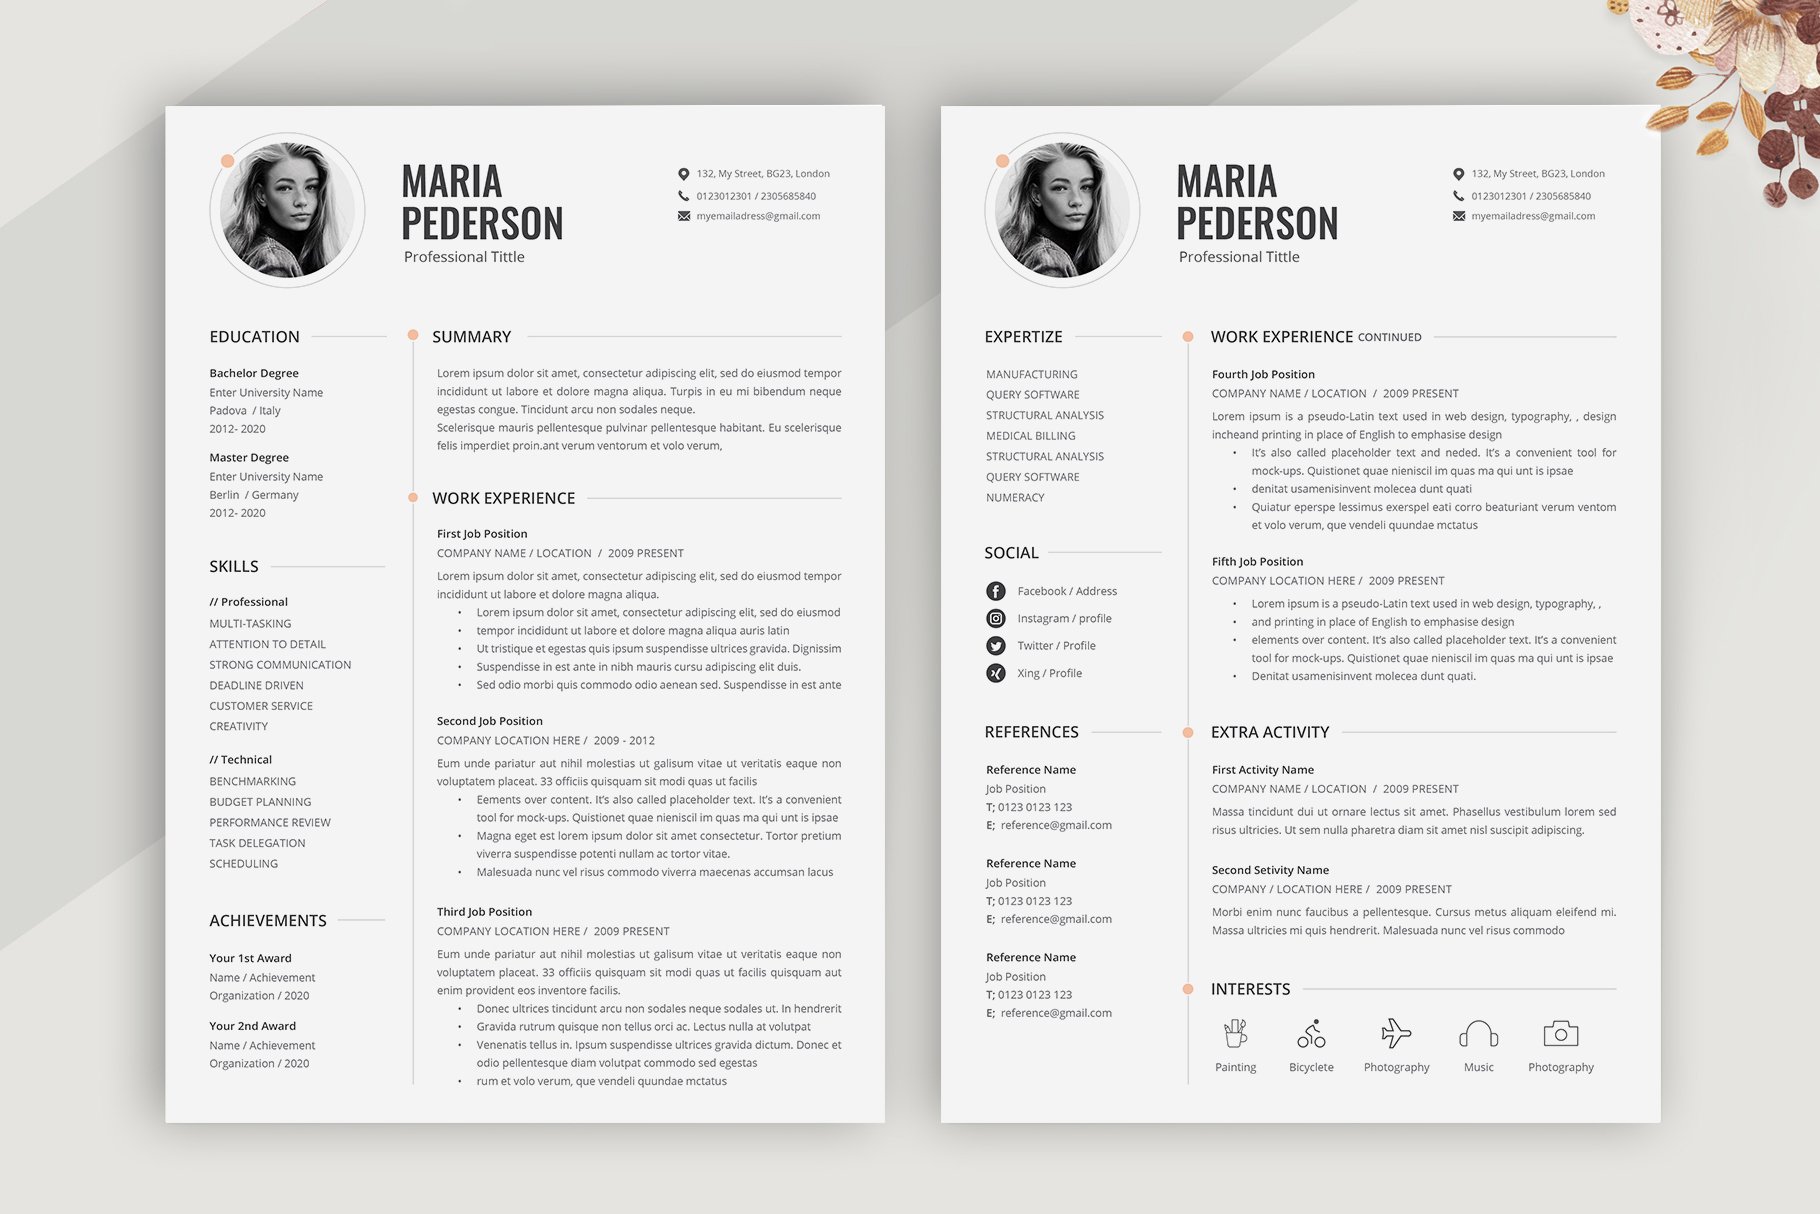 Resume and Cover Letter preview image.